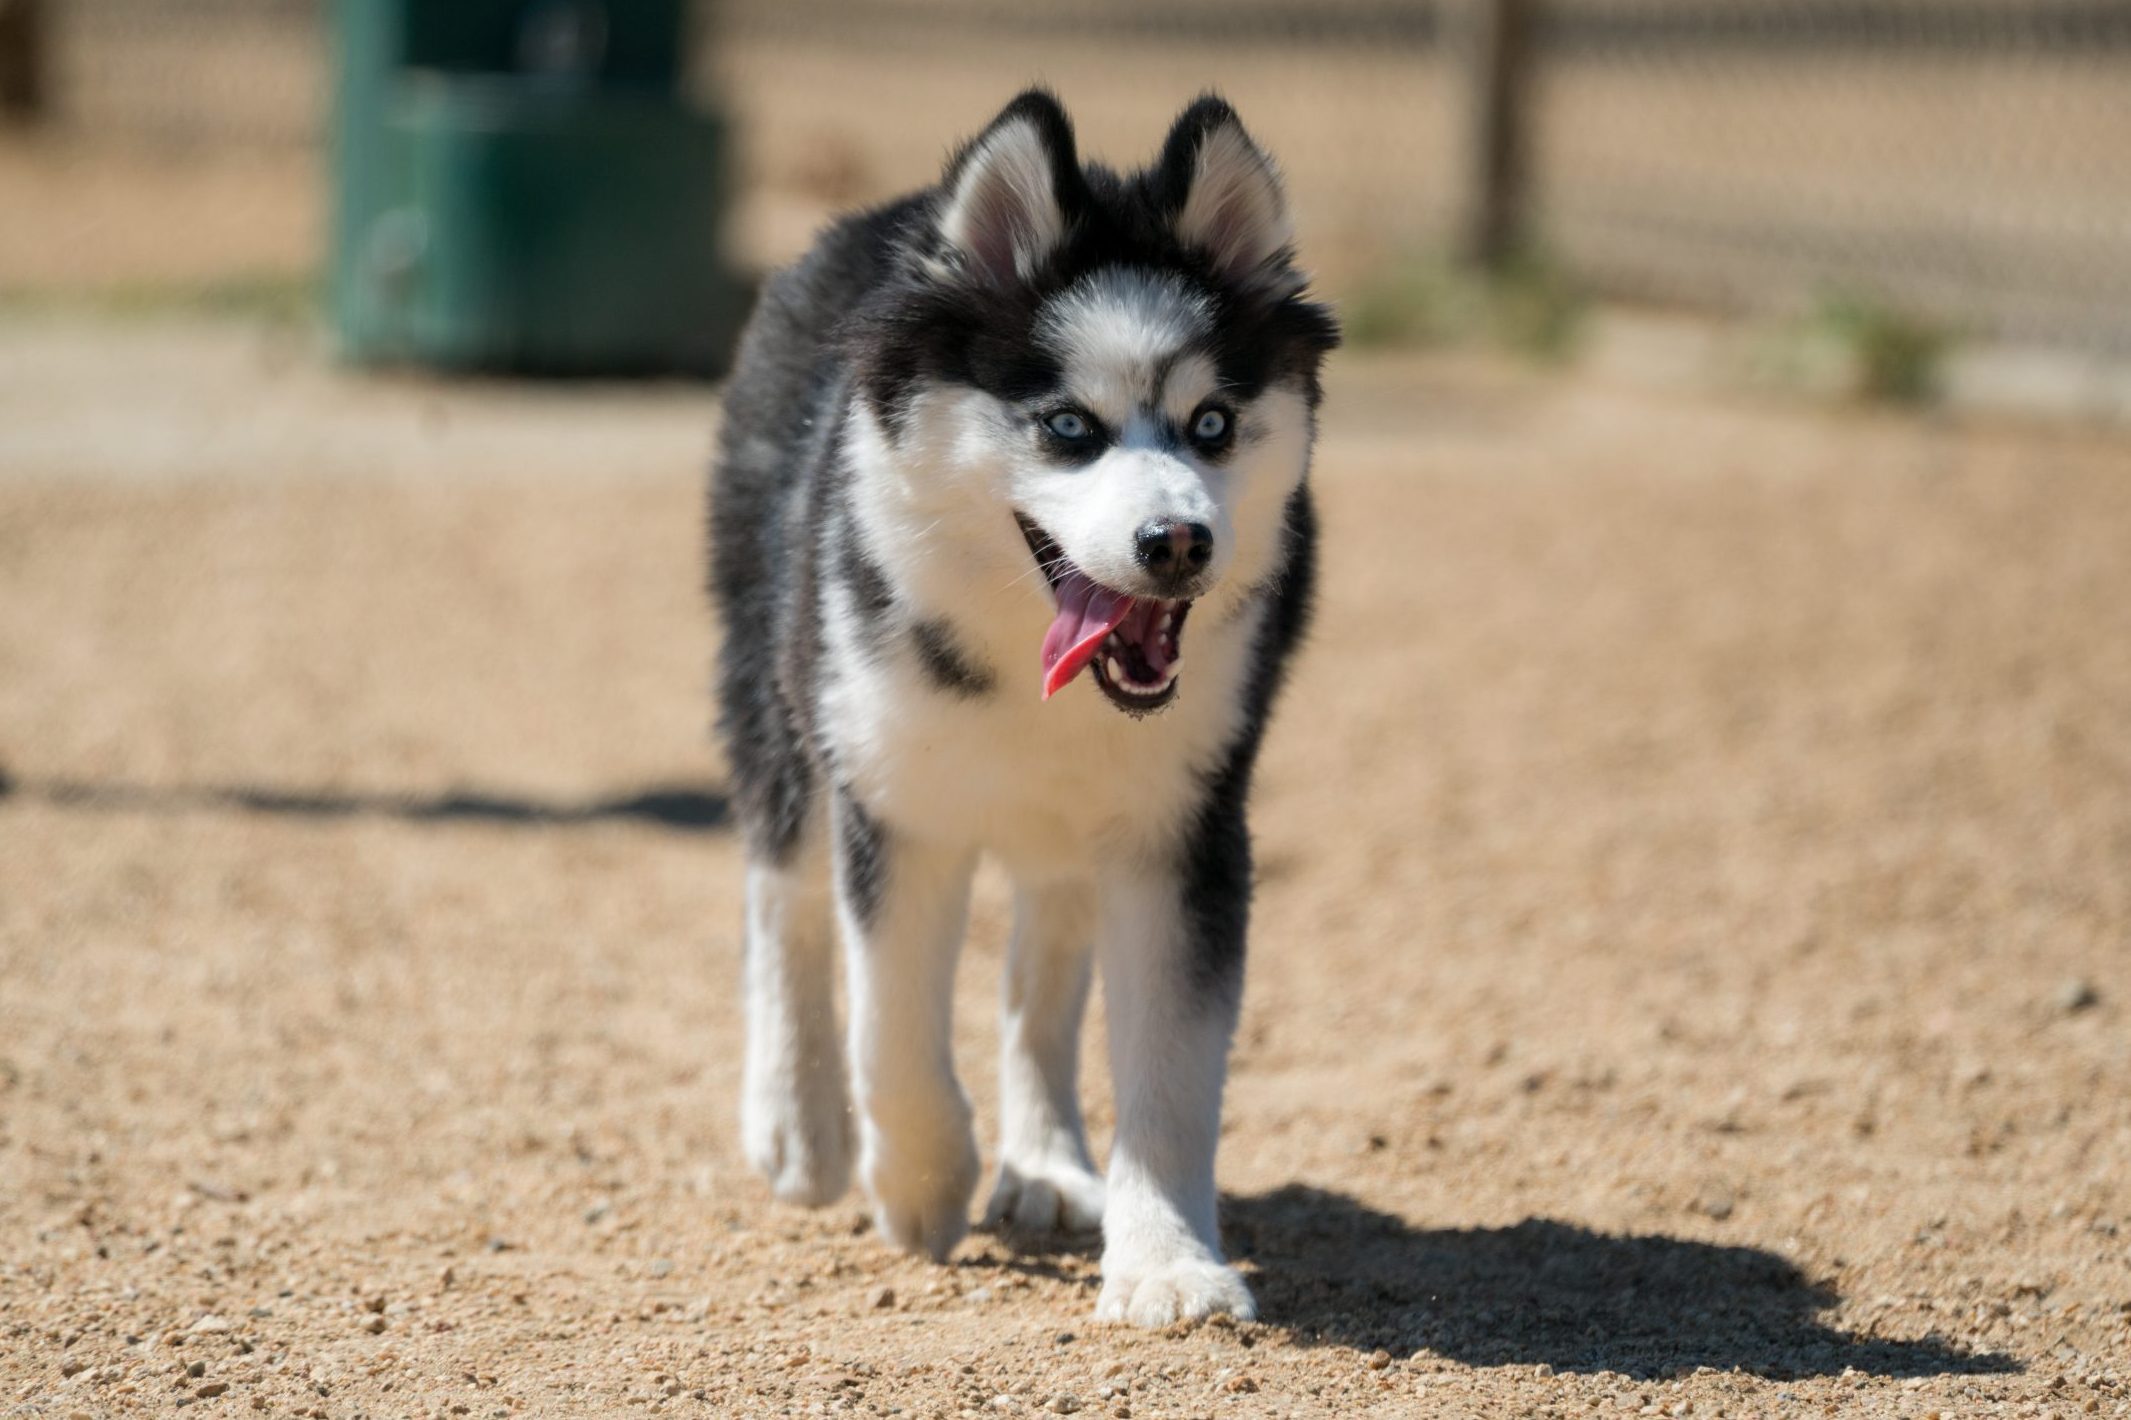 Pomsky, Husky and Pomeranian Mix, Running with Tongue Out